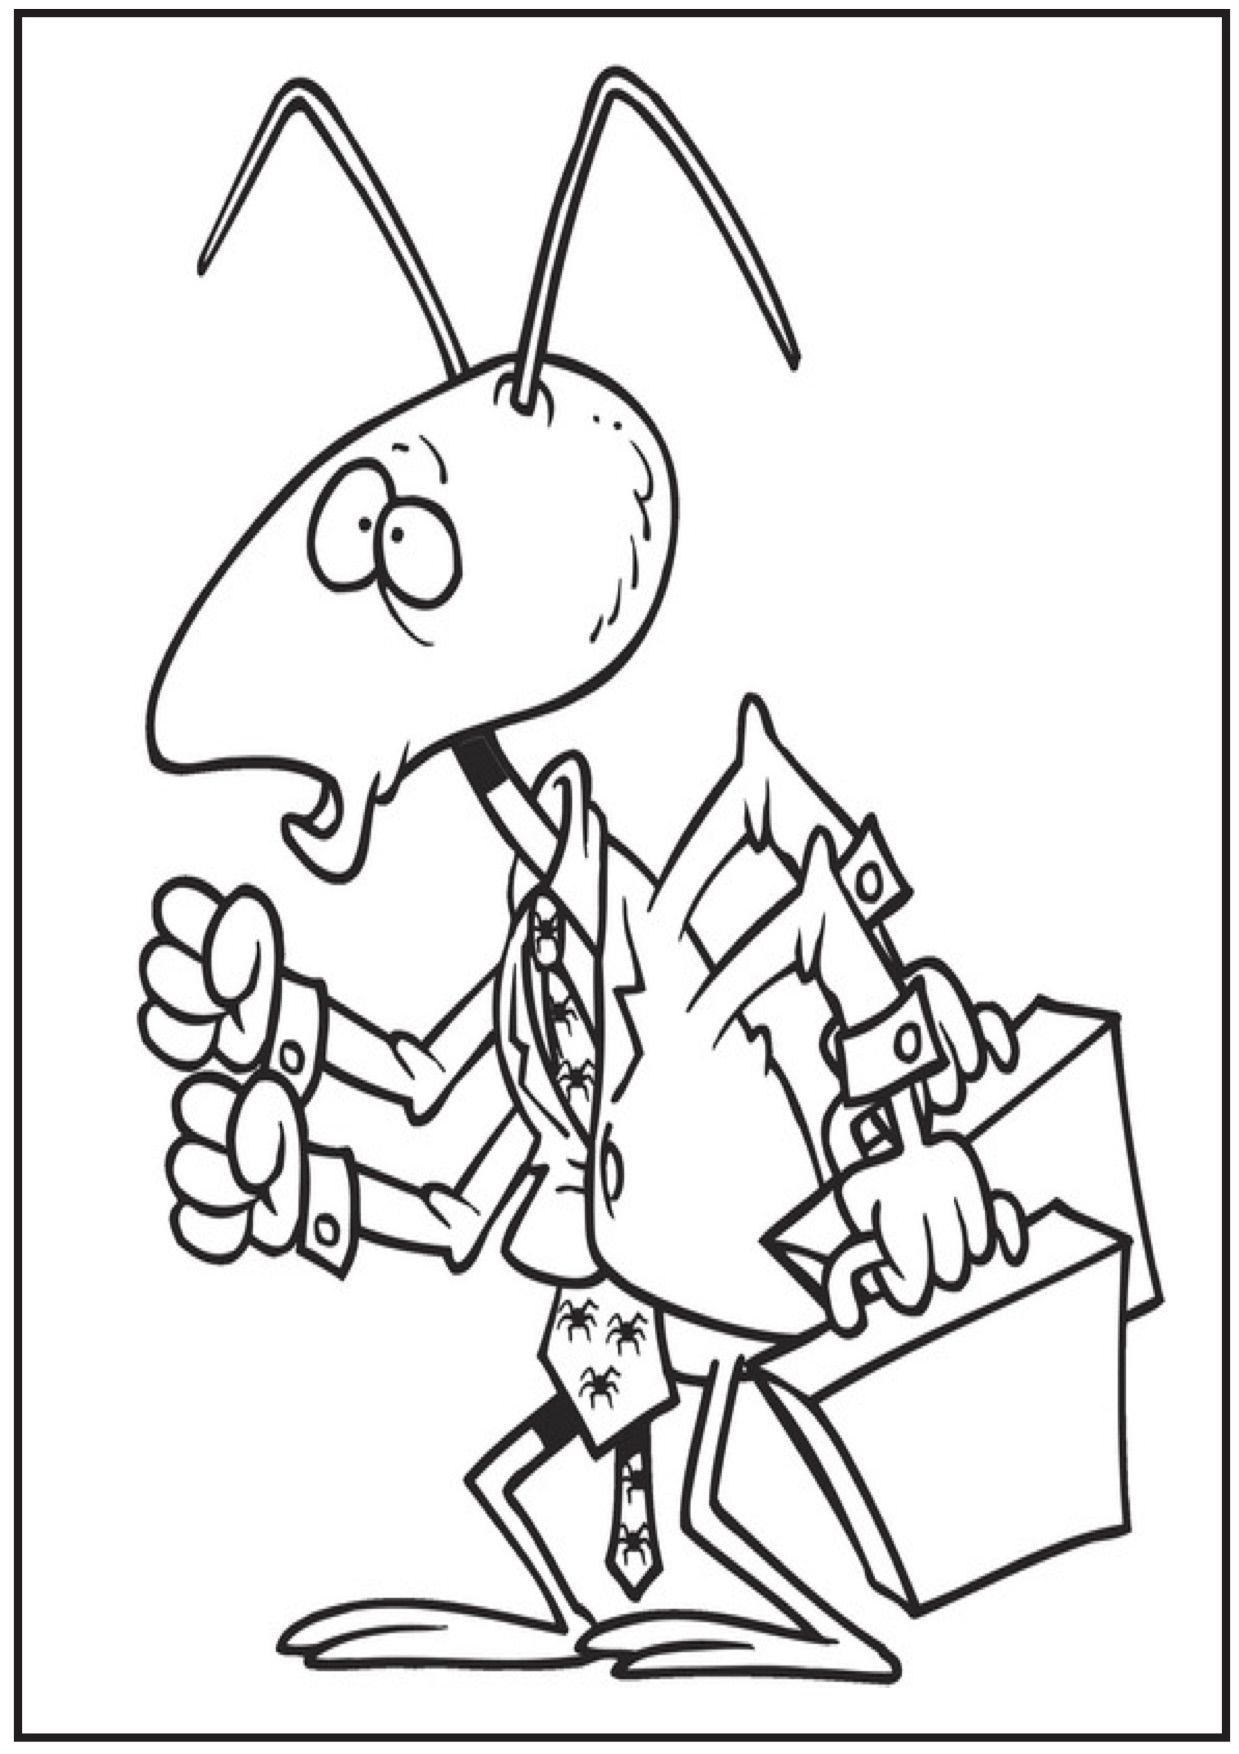 Ant Coloring Pages and Classroom activities